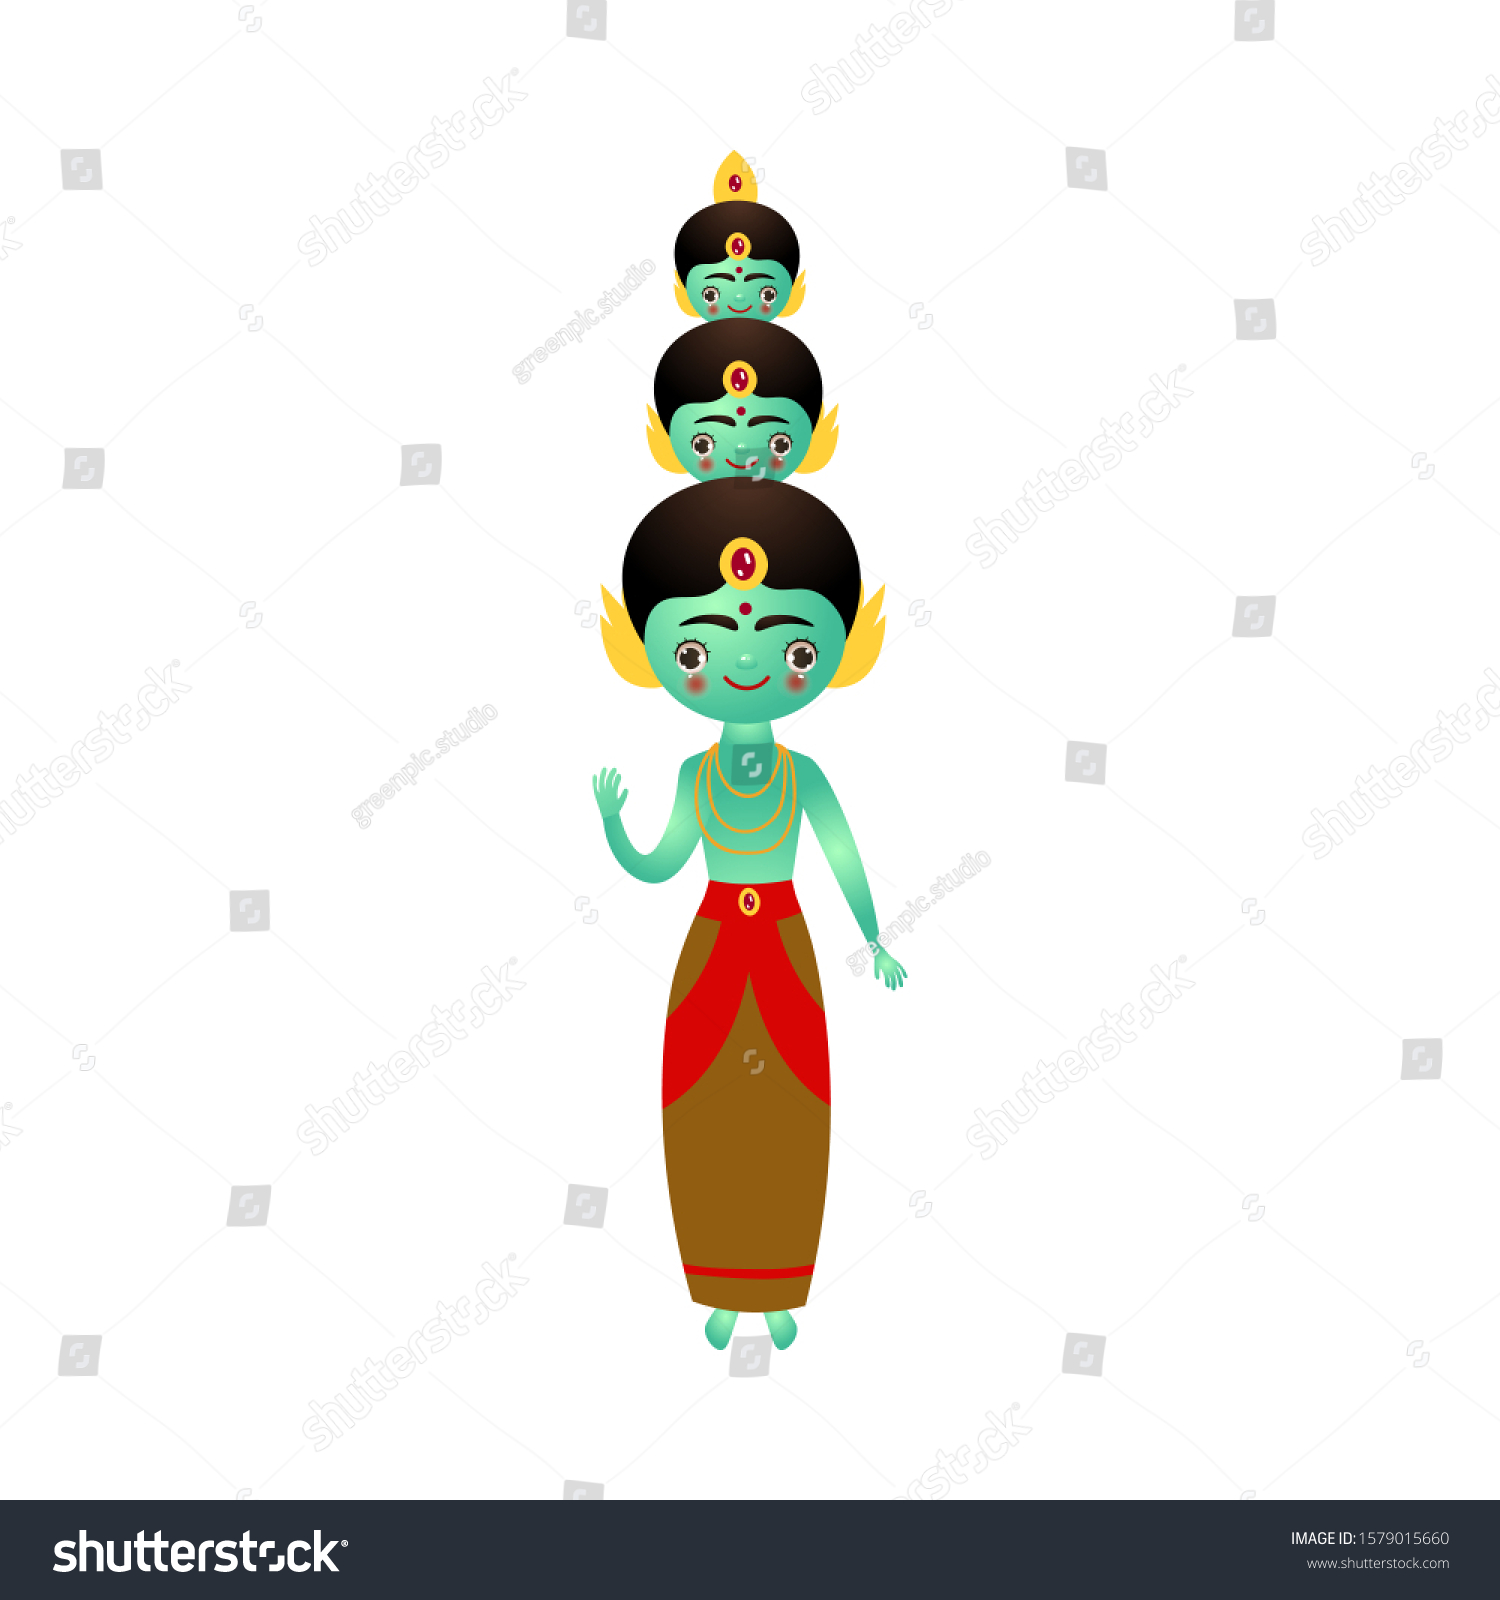 SVG of Indian hindu blue deity with three heads vector illustration svg